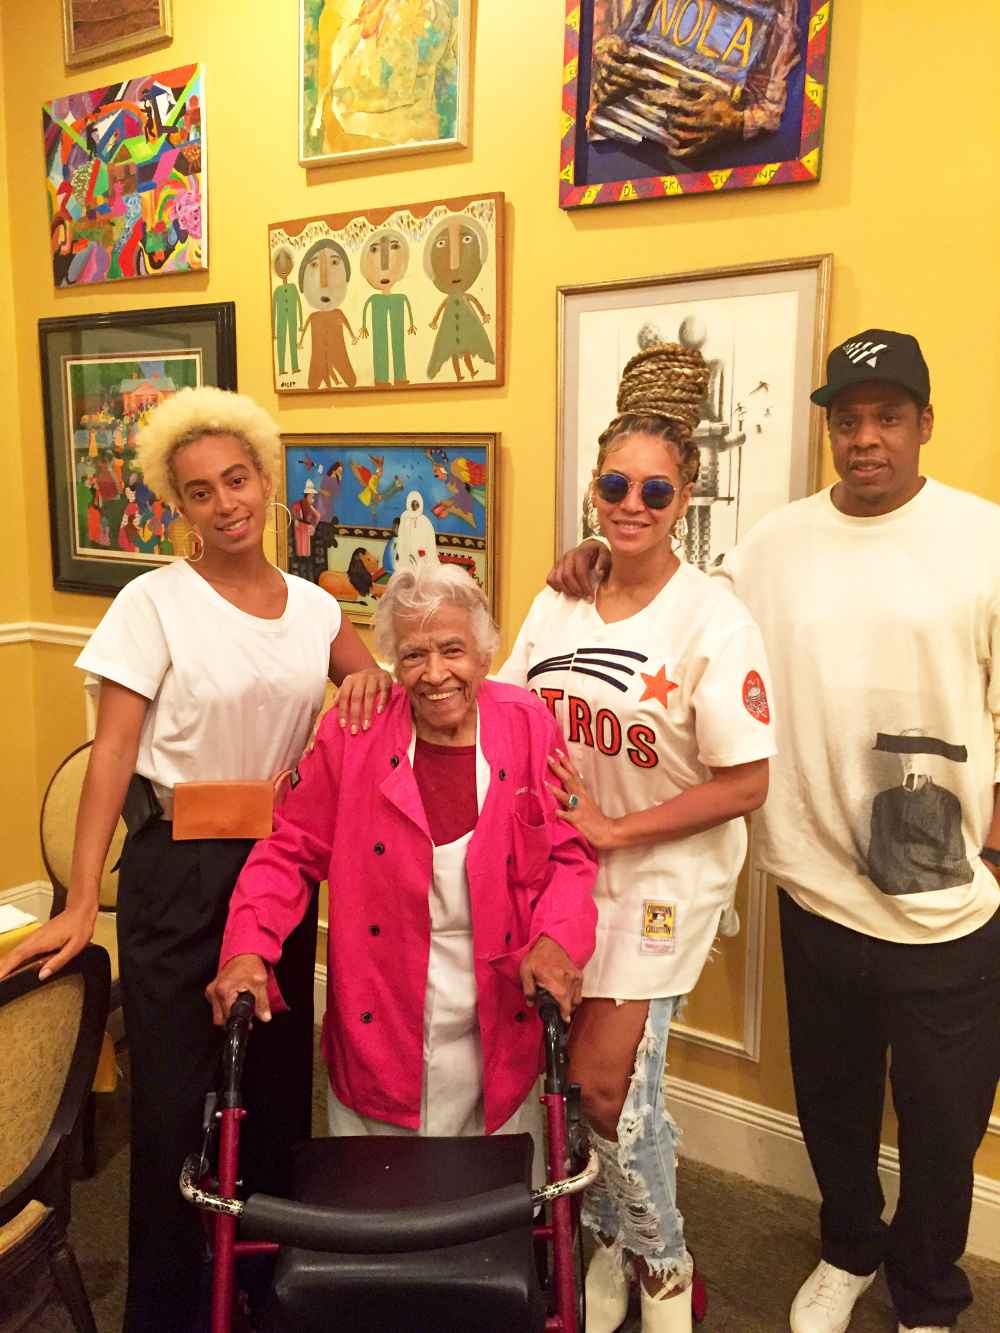 Solange, Beyonce and Jay Z with Leah Chase at Dooky Chase's Restaurant